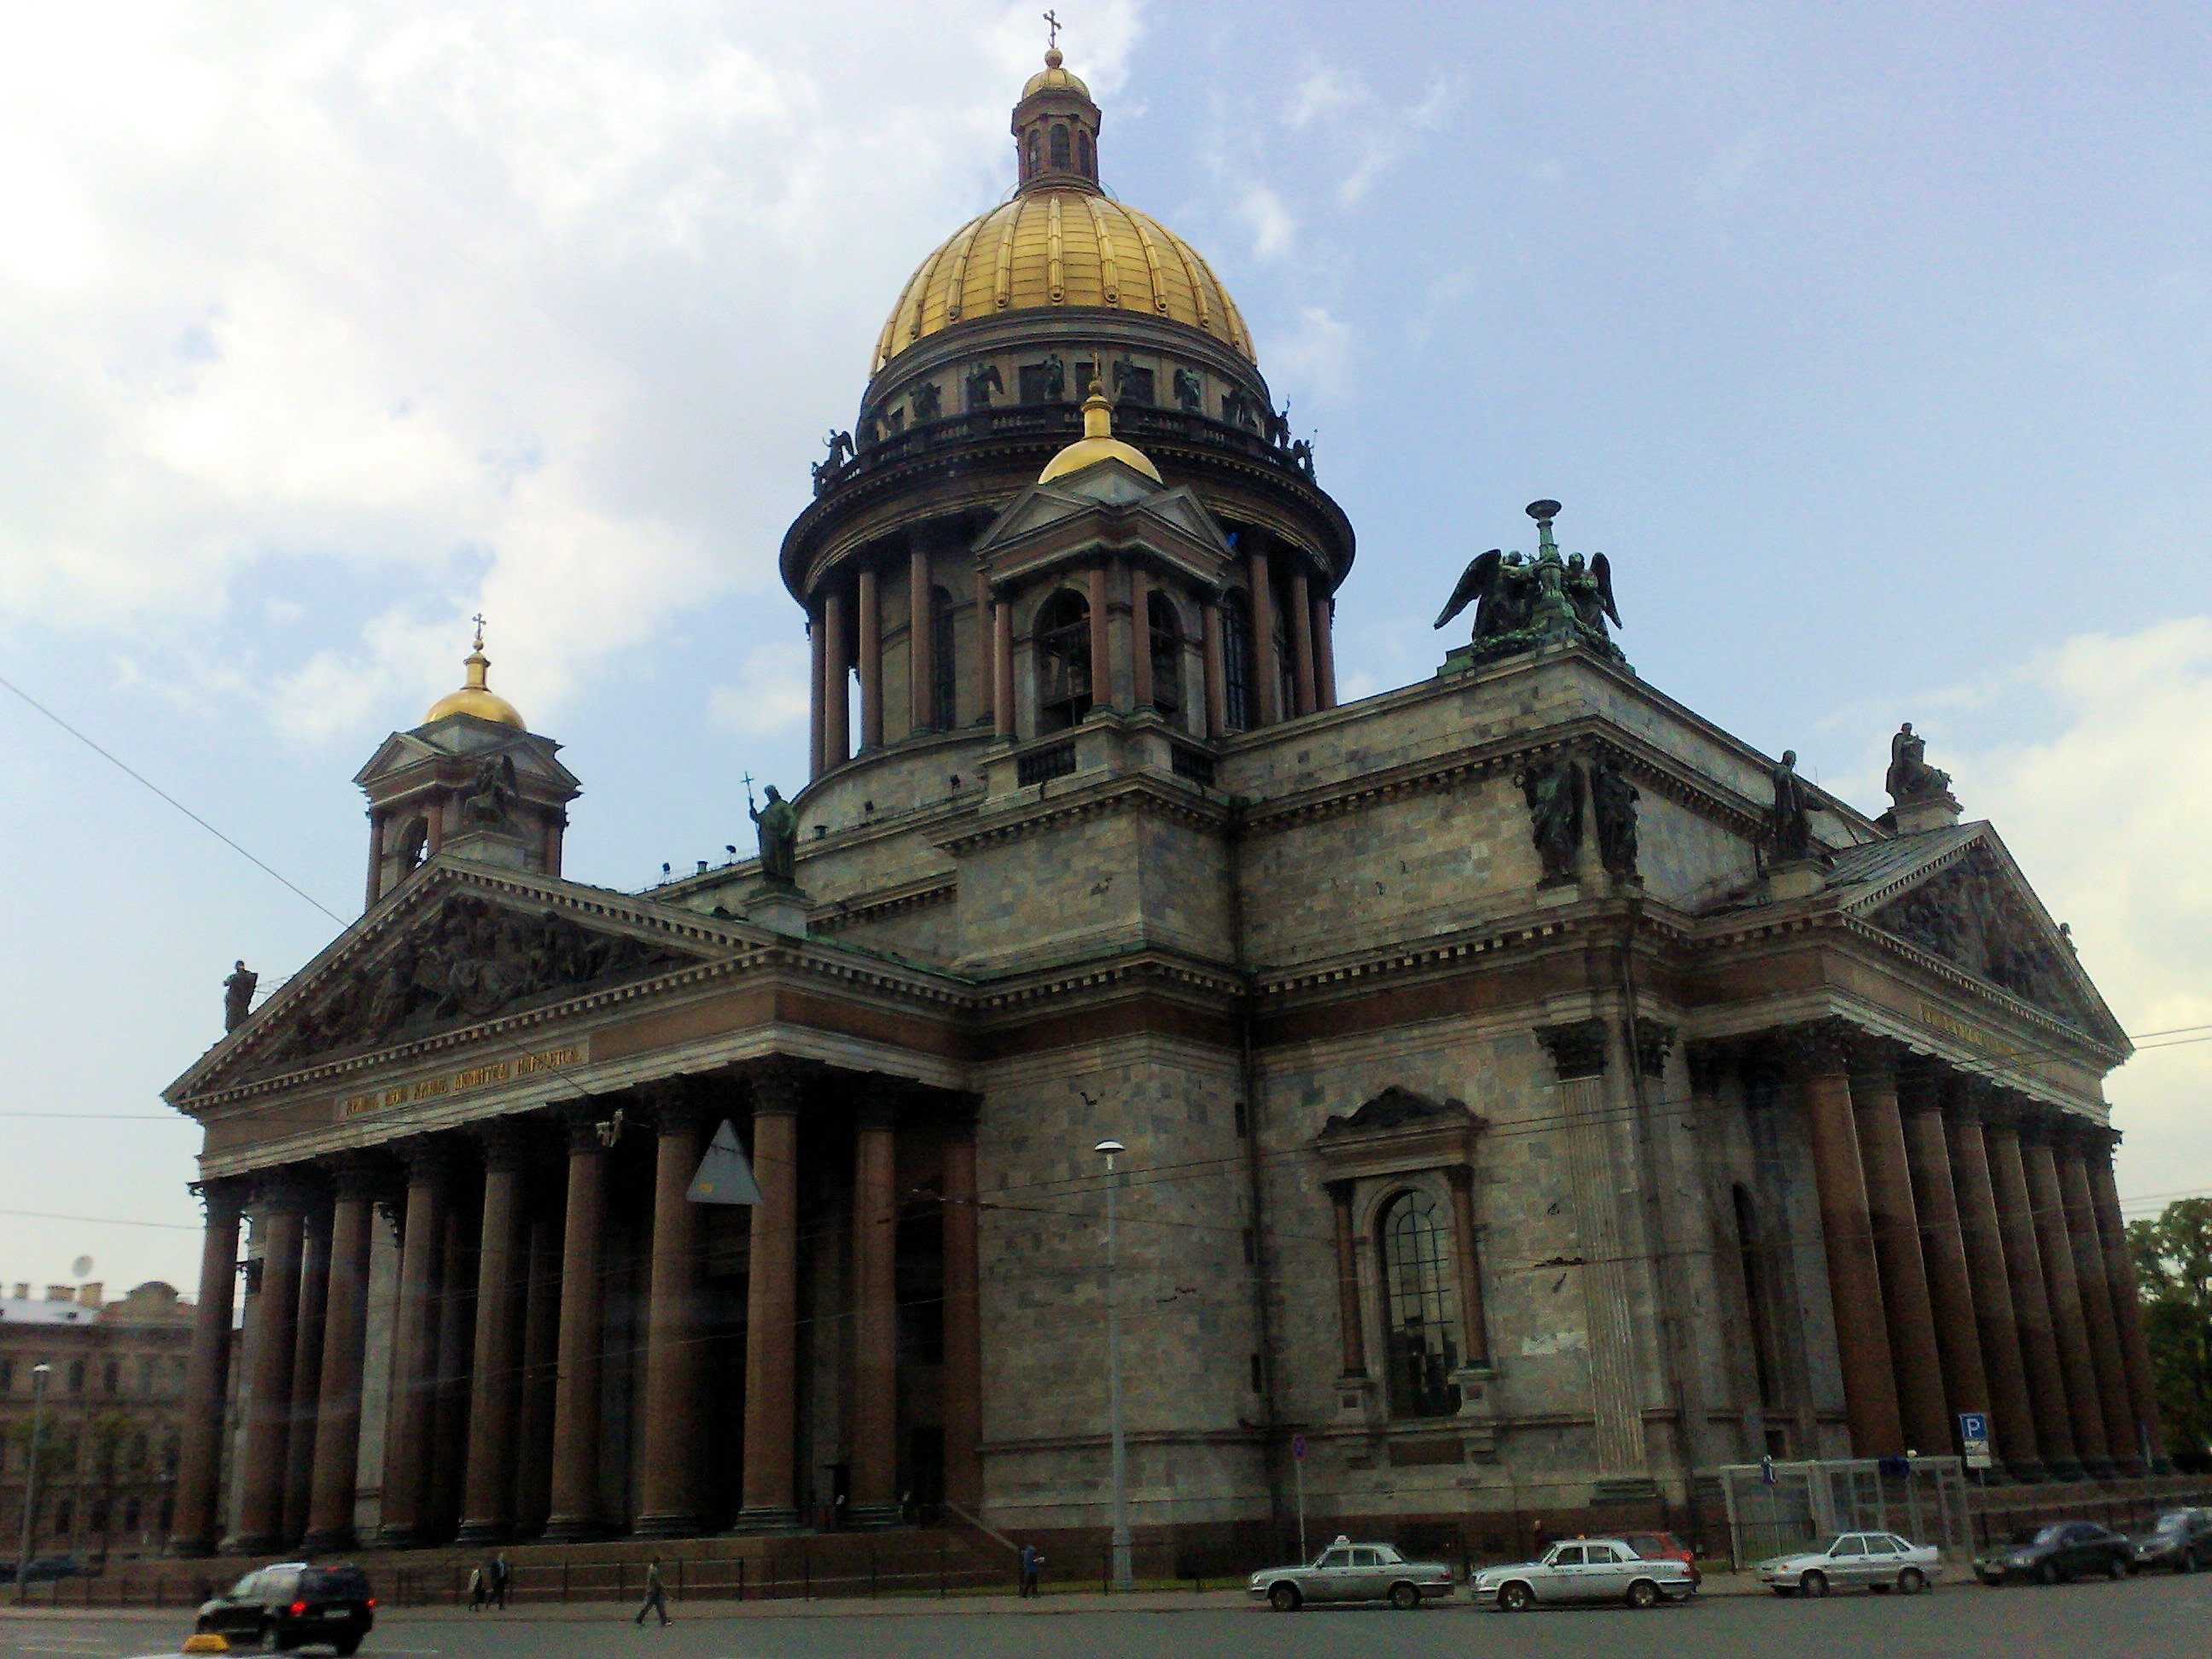 St isaac cathedral, st petersburg, russi photo